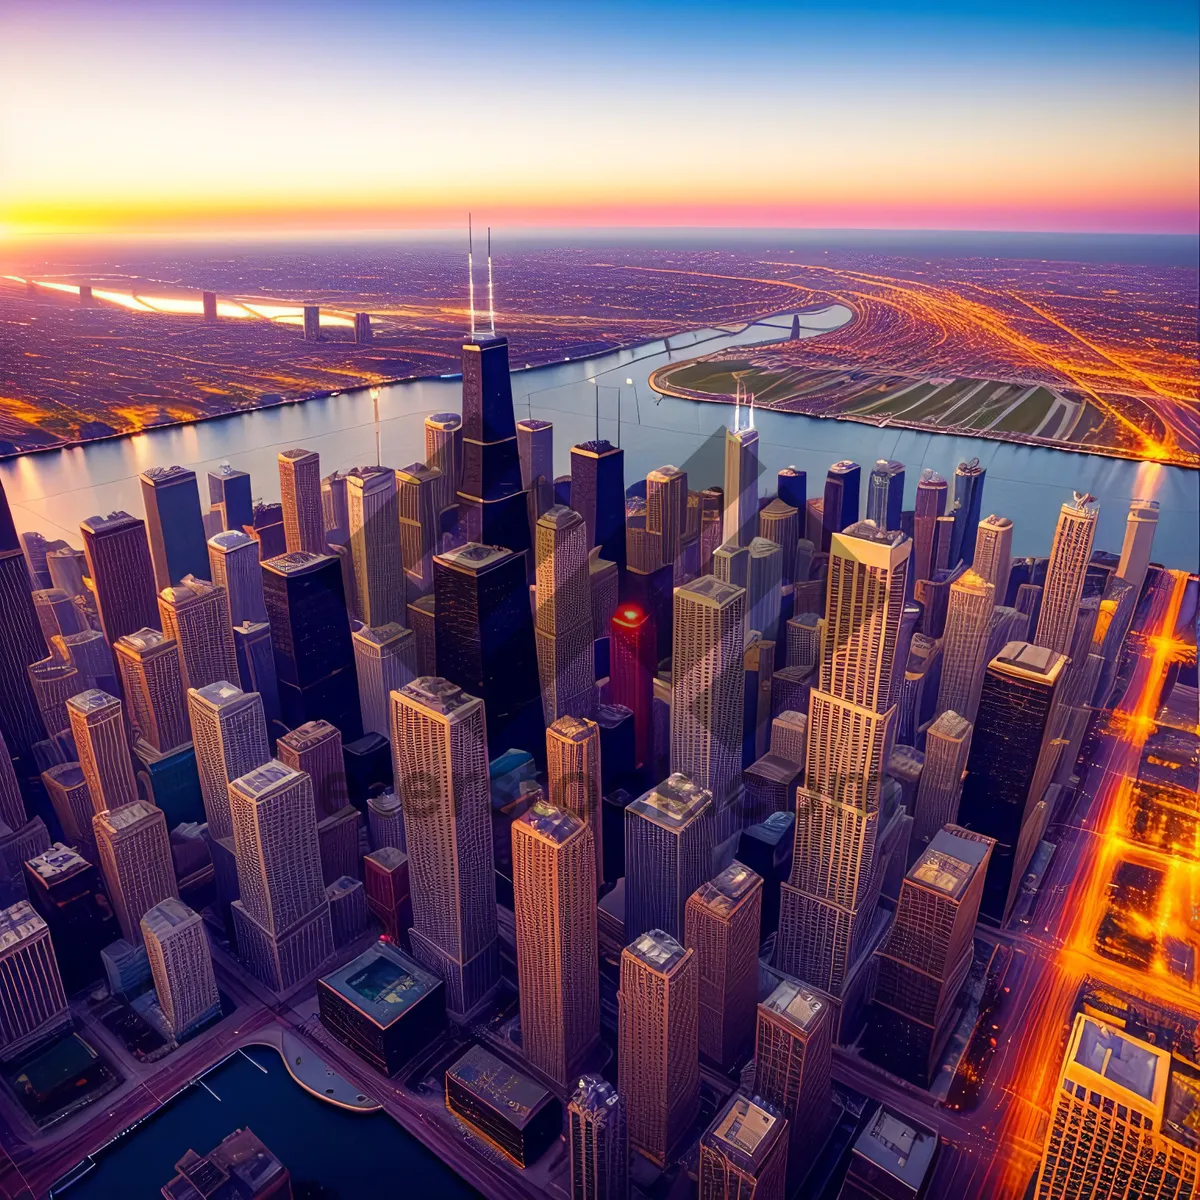 Picture of Modern city skyline at sunset with towering skyscrapers.